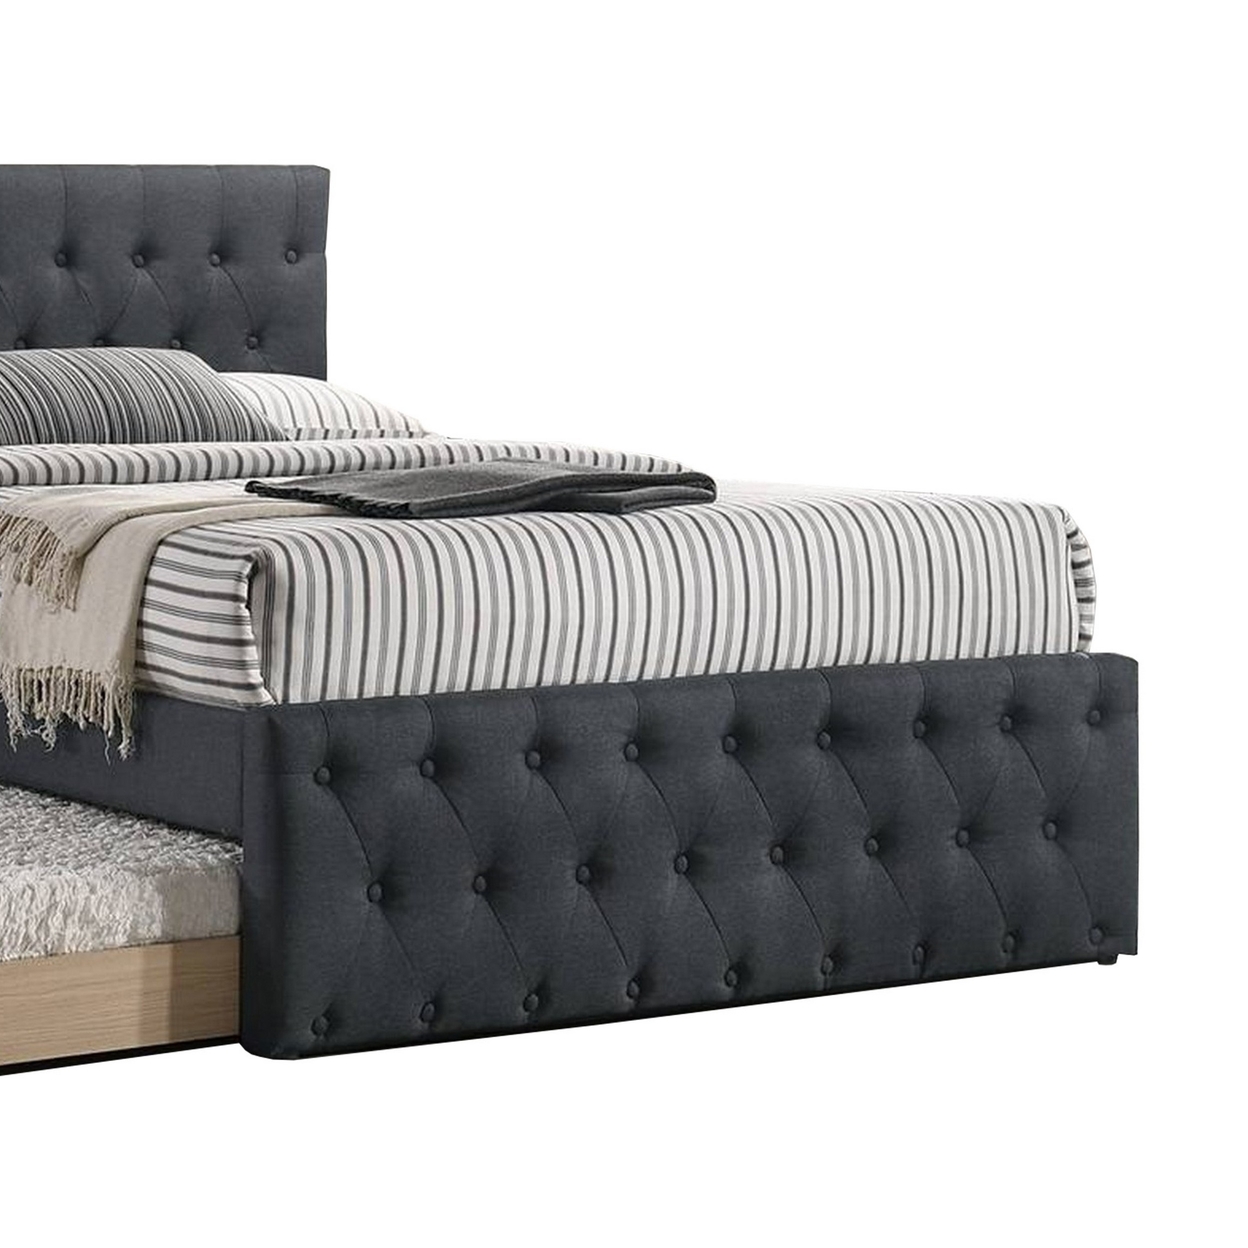 Nek Wood Twin Size Upholstered Bed With Trundle, Tufted Charcoal Burlap- Saltoro Sherpi